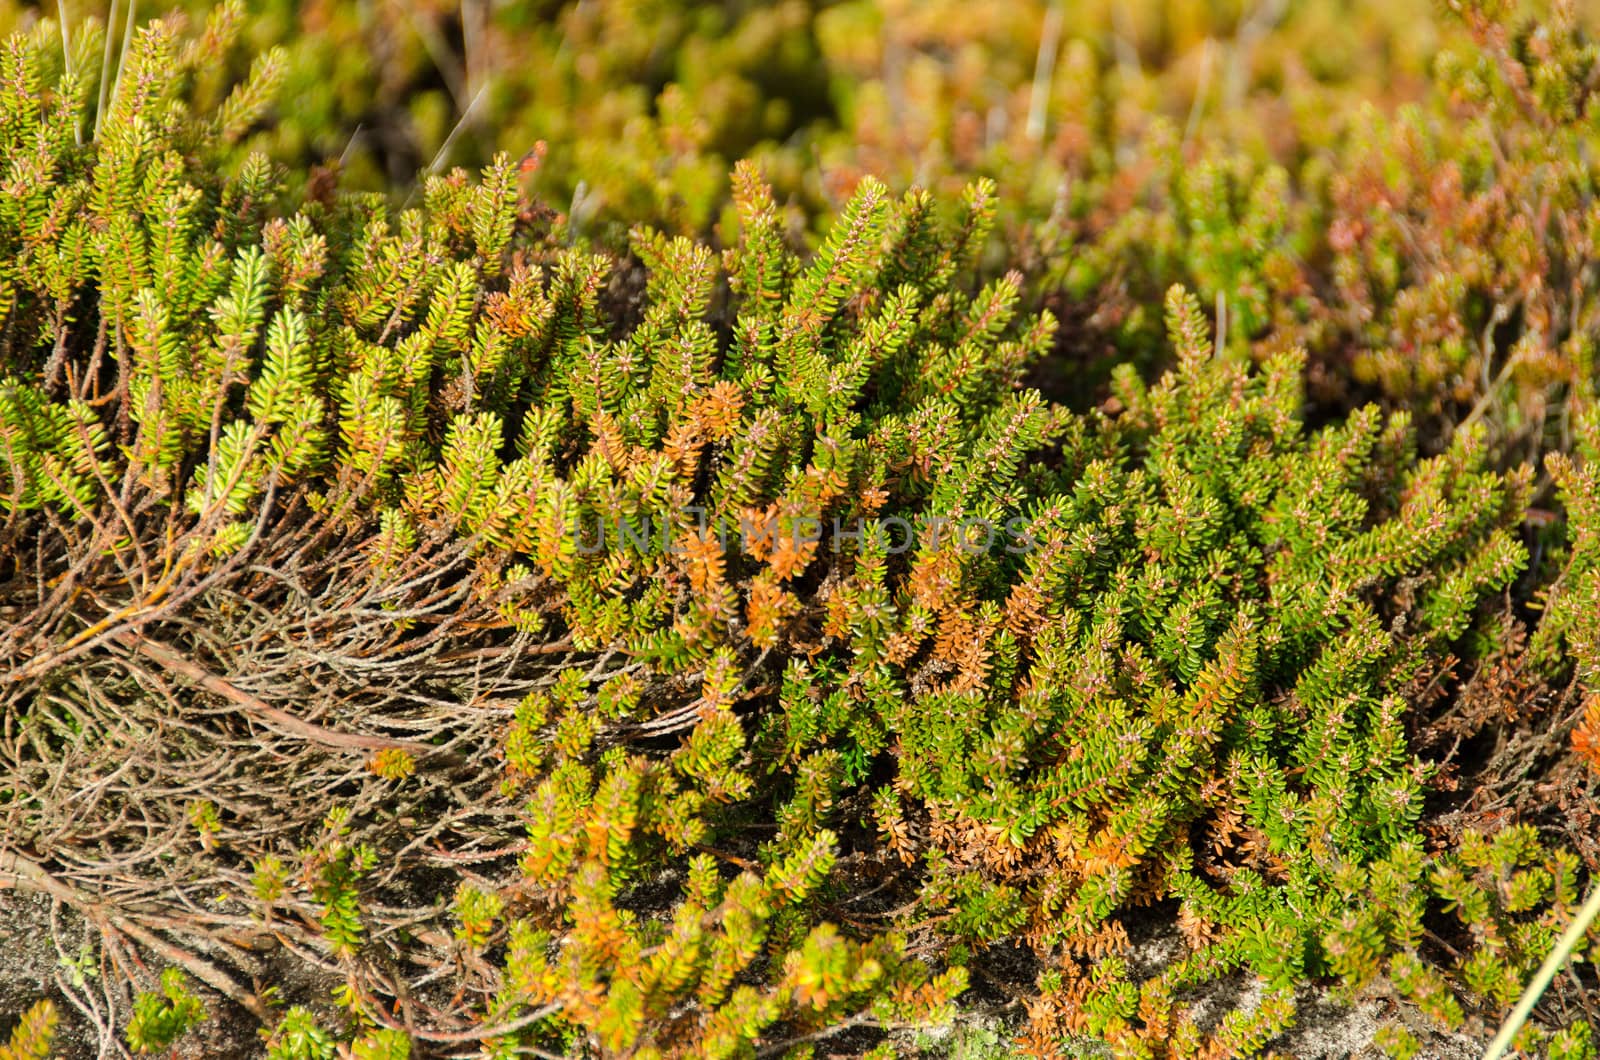 Coastal landscape with typical empetrum or crowberry plants